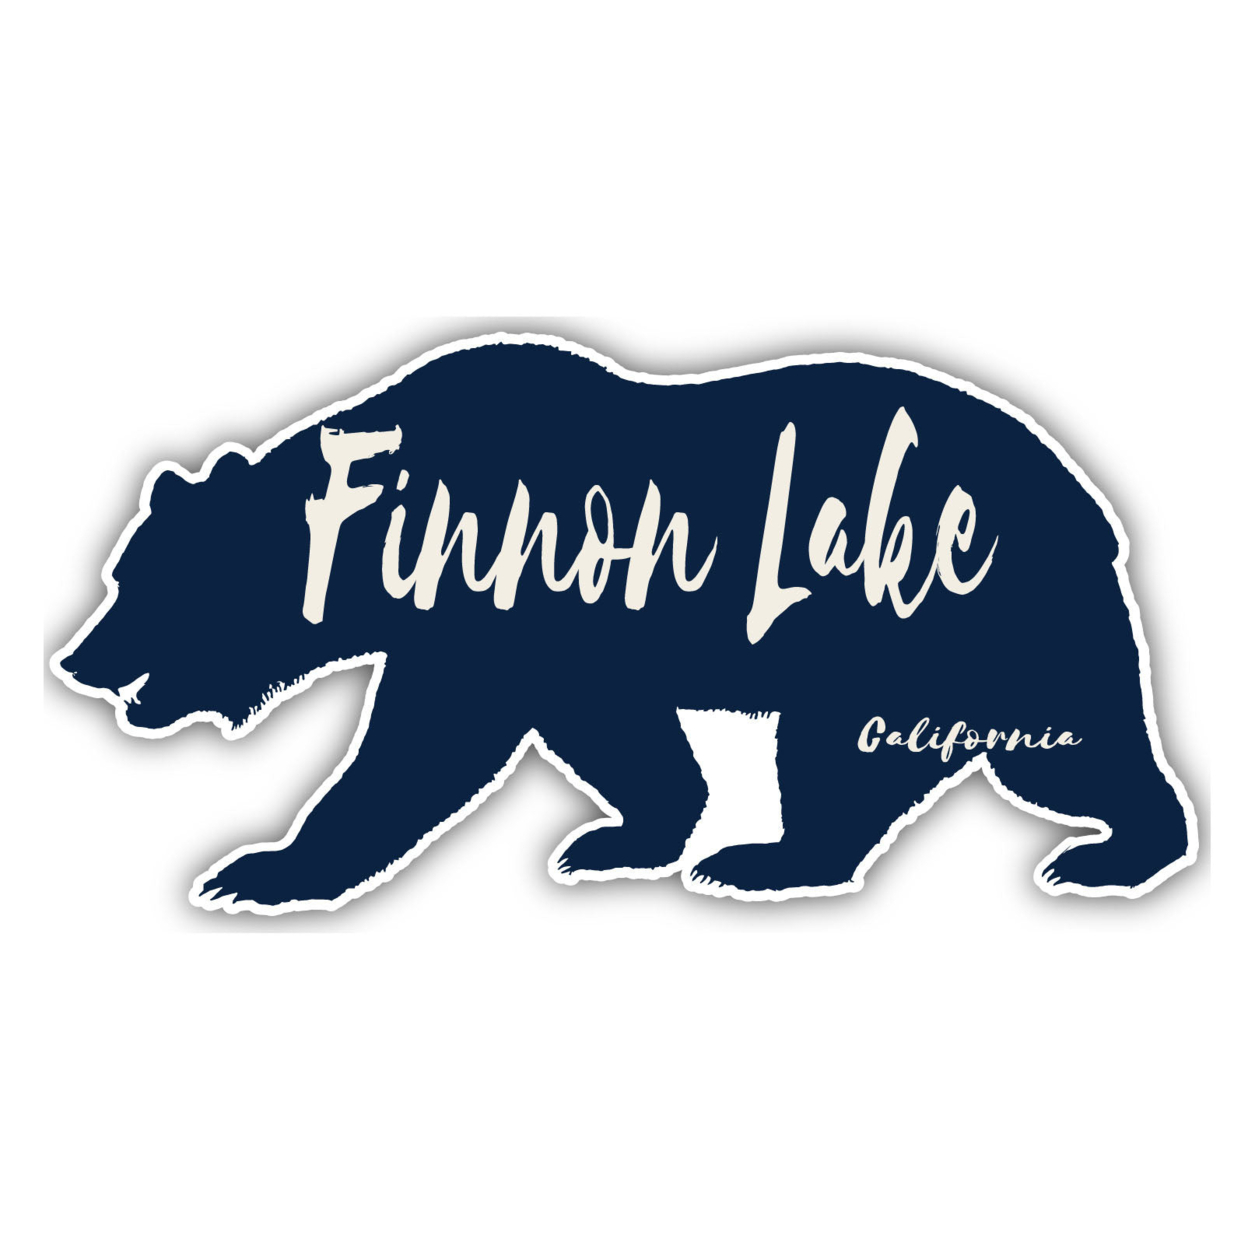 Finnon Lake California Souvenir Decorative Stickers (Choose Theme And Size) - 4-Pack, 12-Inch, Camp Life